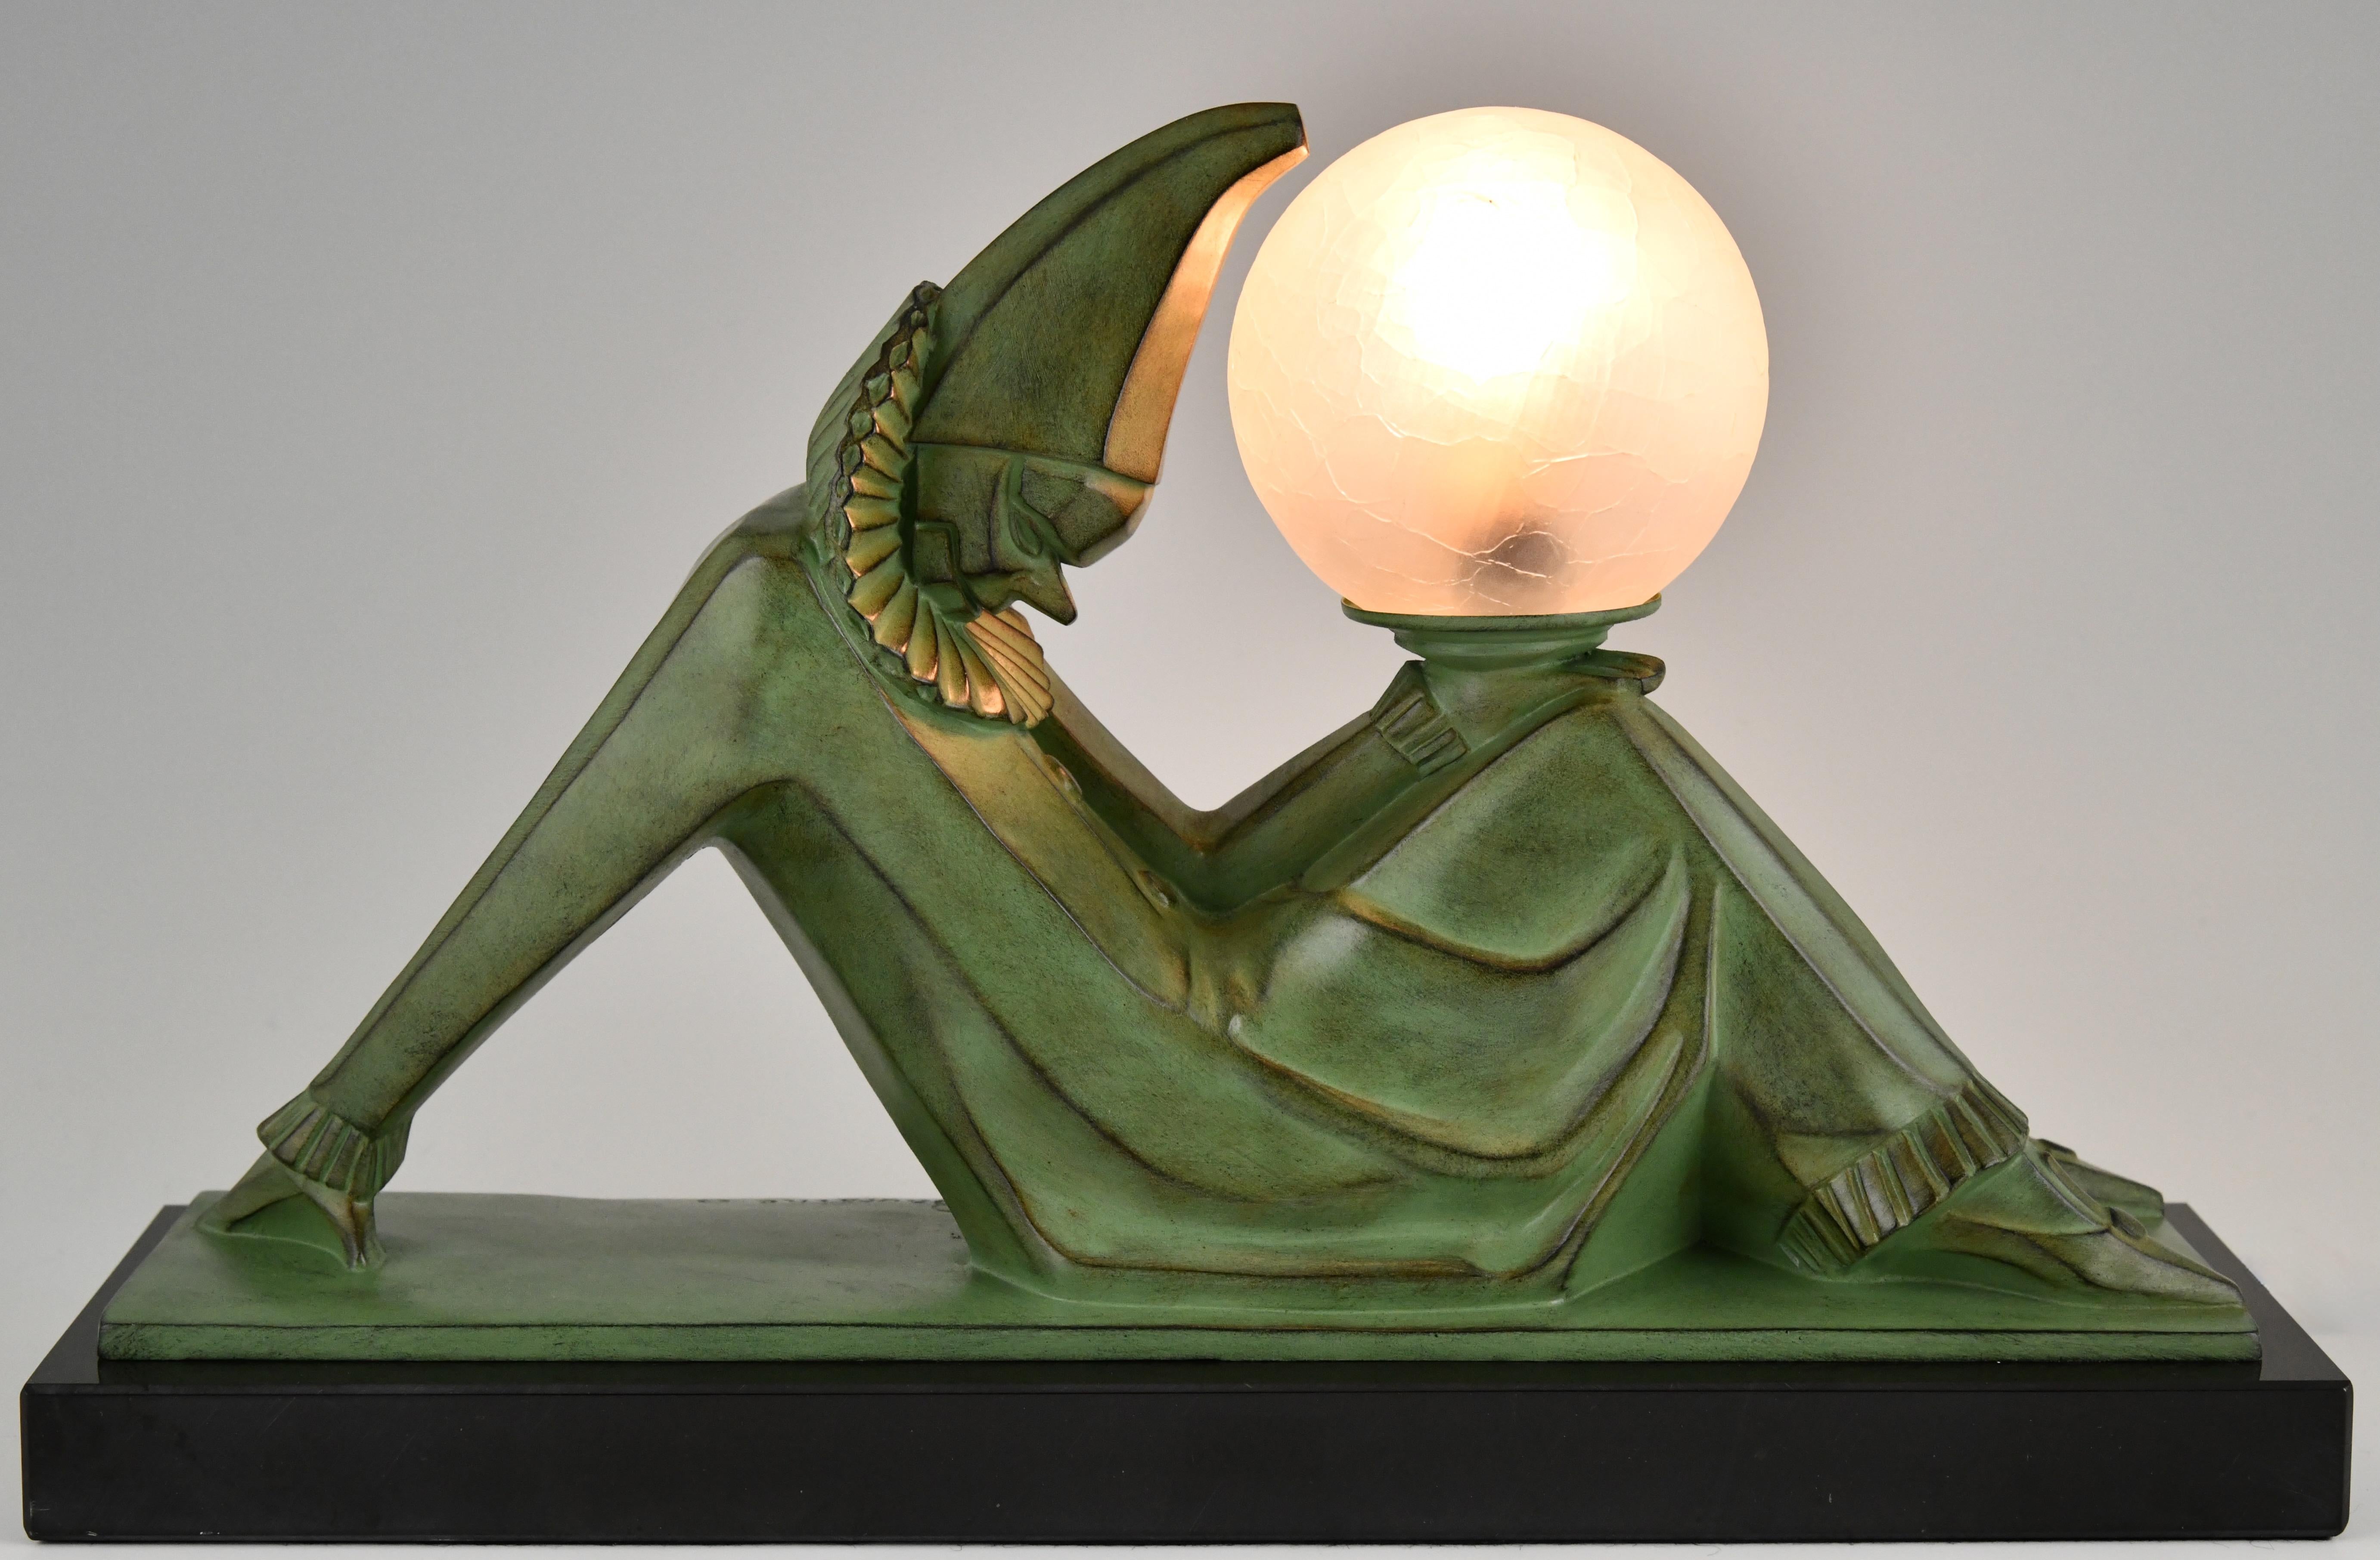 Art Deco lamp Pierrot with ball by Marcel André Bouraine.
Signed Bouraine. Foundry seal Le Verrier Paris. 
Patinated Art Metal. 
Belgian black marble base.
Glass shade. 
Clown à la boule. 

Literature:
Art Deco and other figures, Brian Catley. 
Art